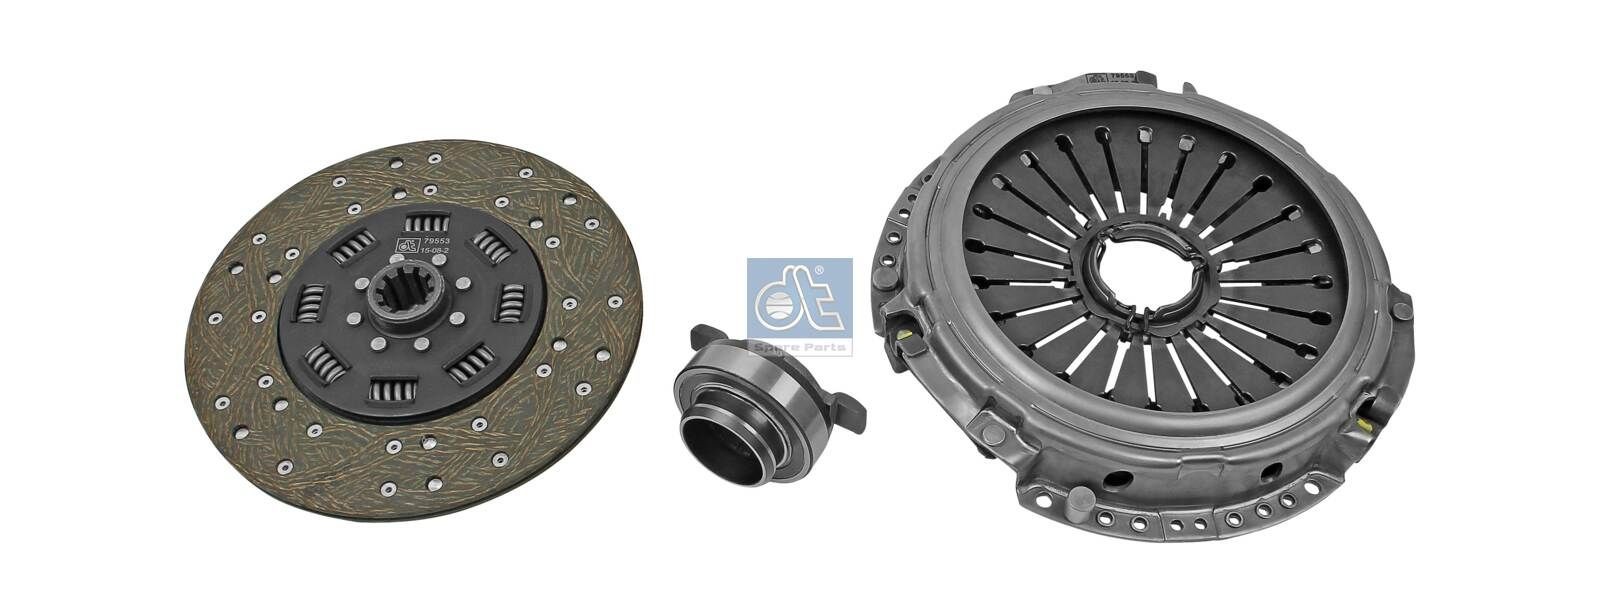 Original DT Spare Parts 3400 125 201 Clutch and flywheel kit 4.91977 for MERCEDES-BENZ M-Class